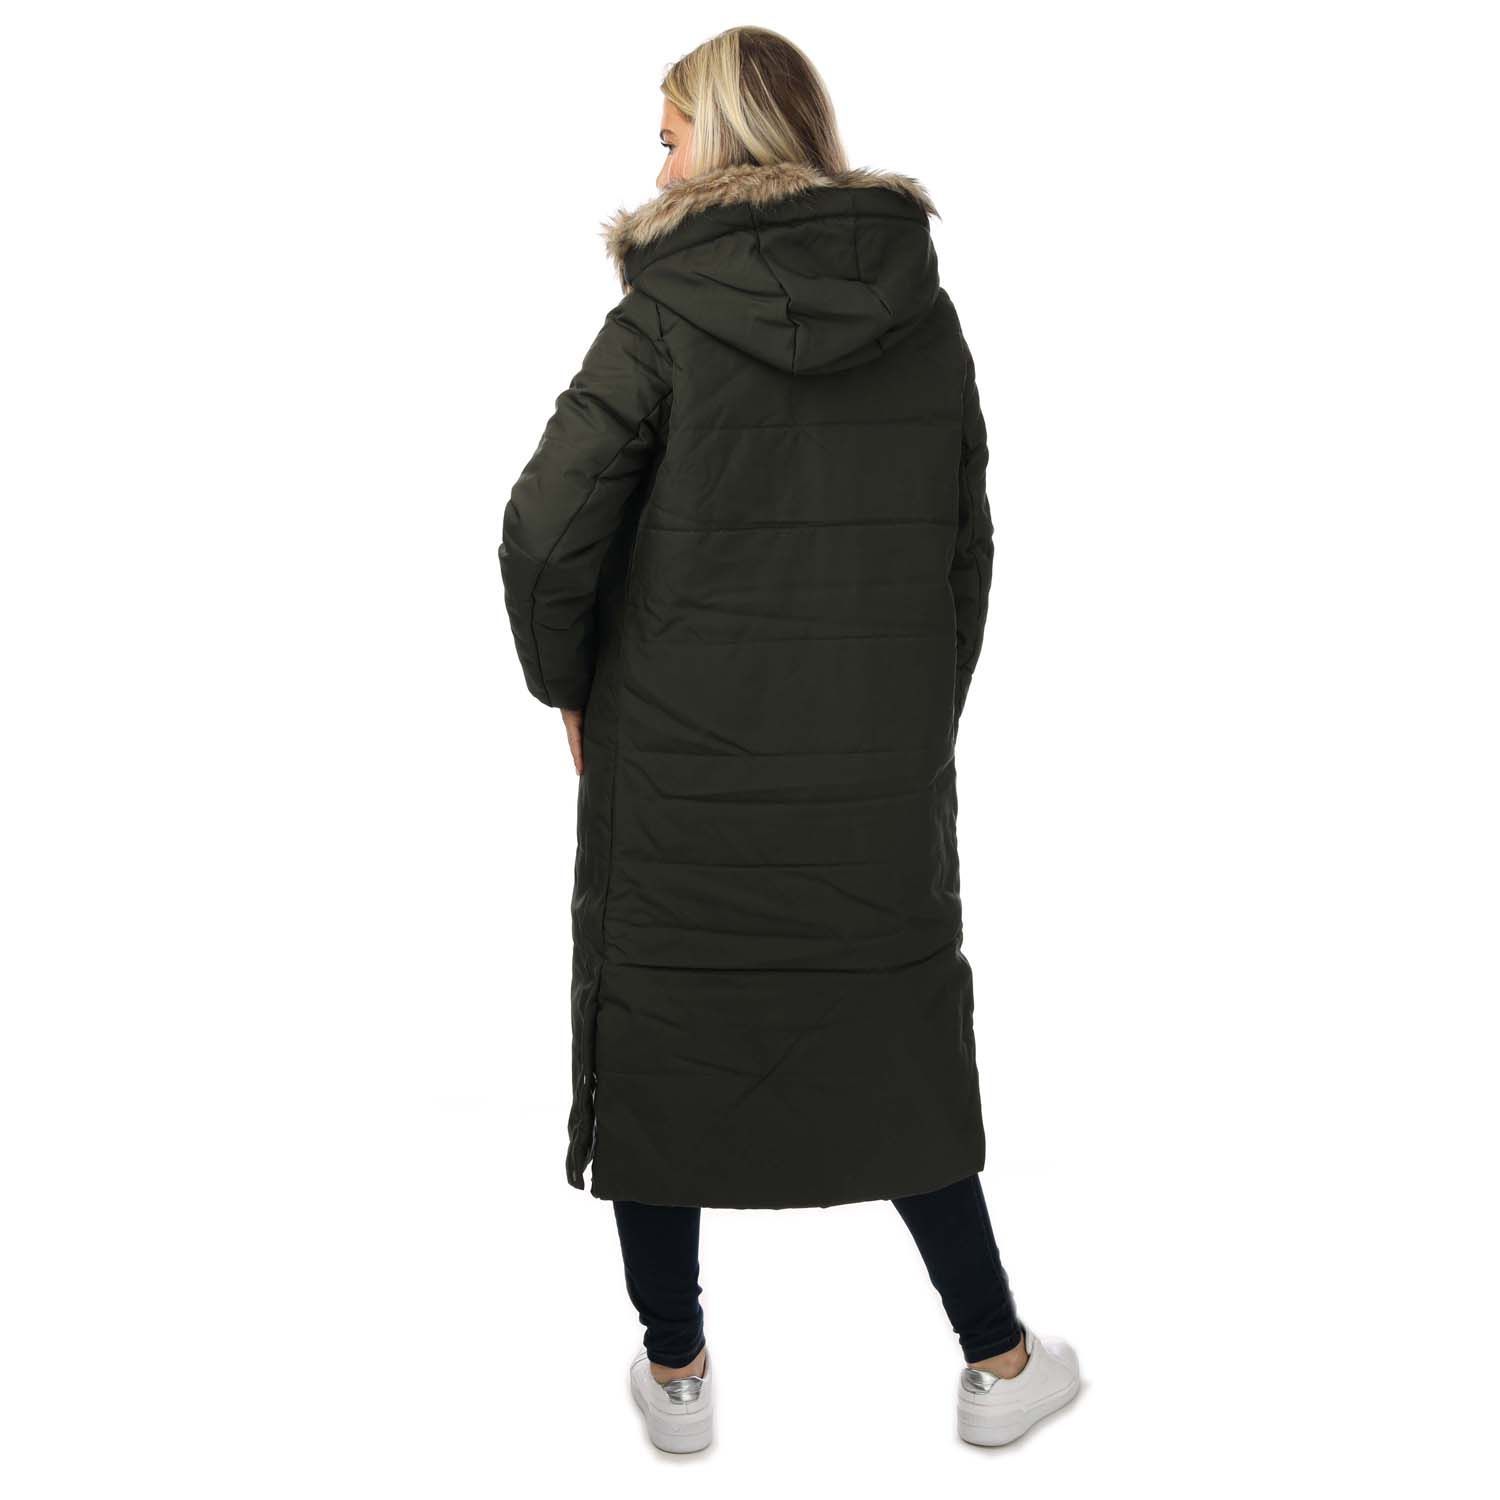 Womens Vero Moda Addison Long Coat in black.- Faux fur lined hood.- Two-way zipper.- Pockets to sides with popper closure.- Elasticated cuffs for extra warmth.- Full padded.- Horizontal stitch detail.- Fully lined.- 100% Polyester.  Machine washable.- Ref: 10267116